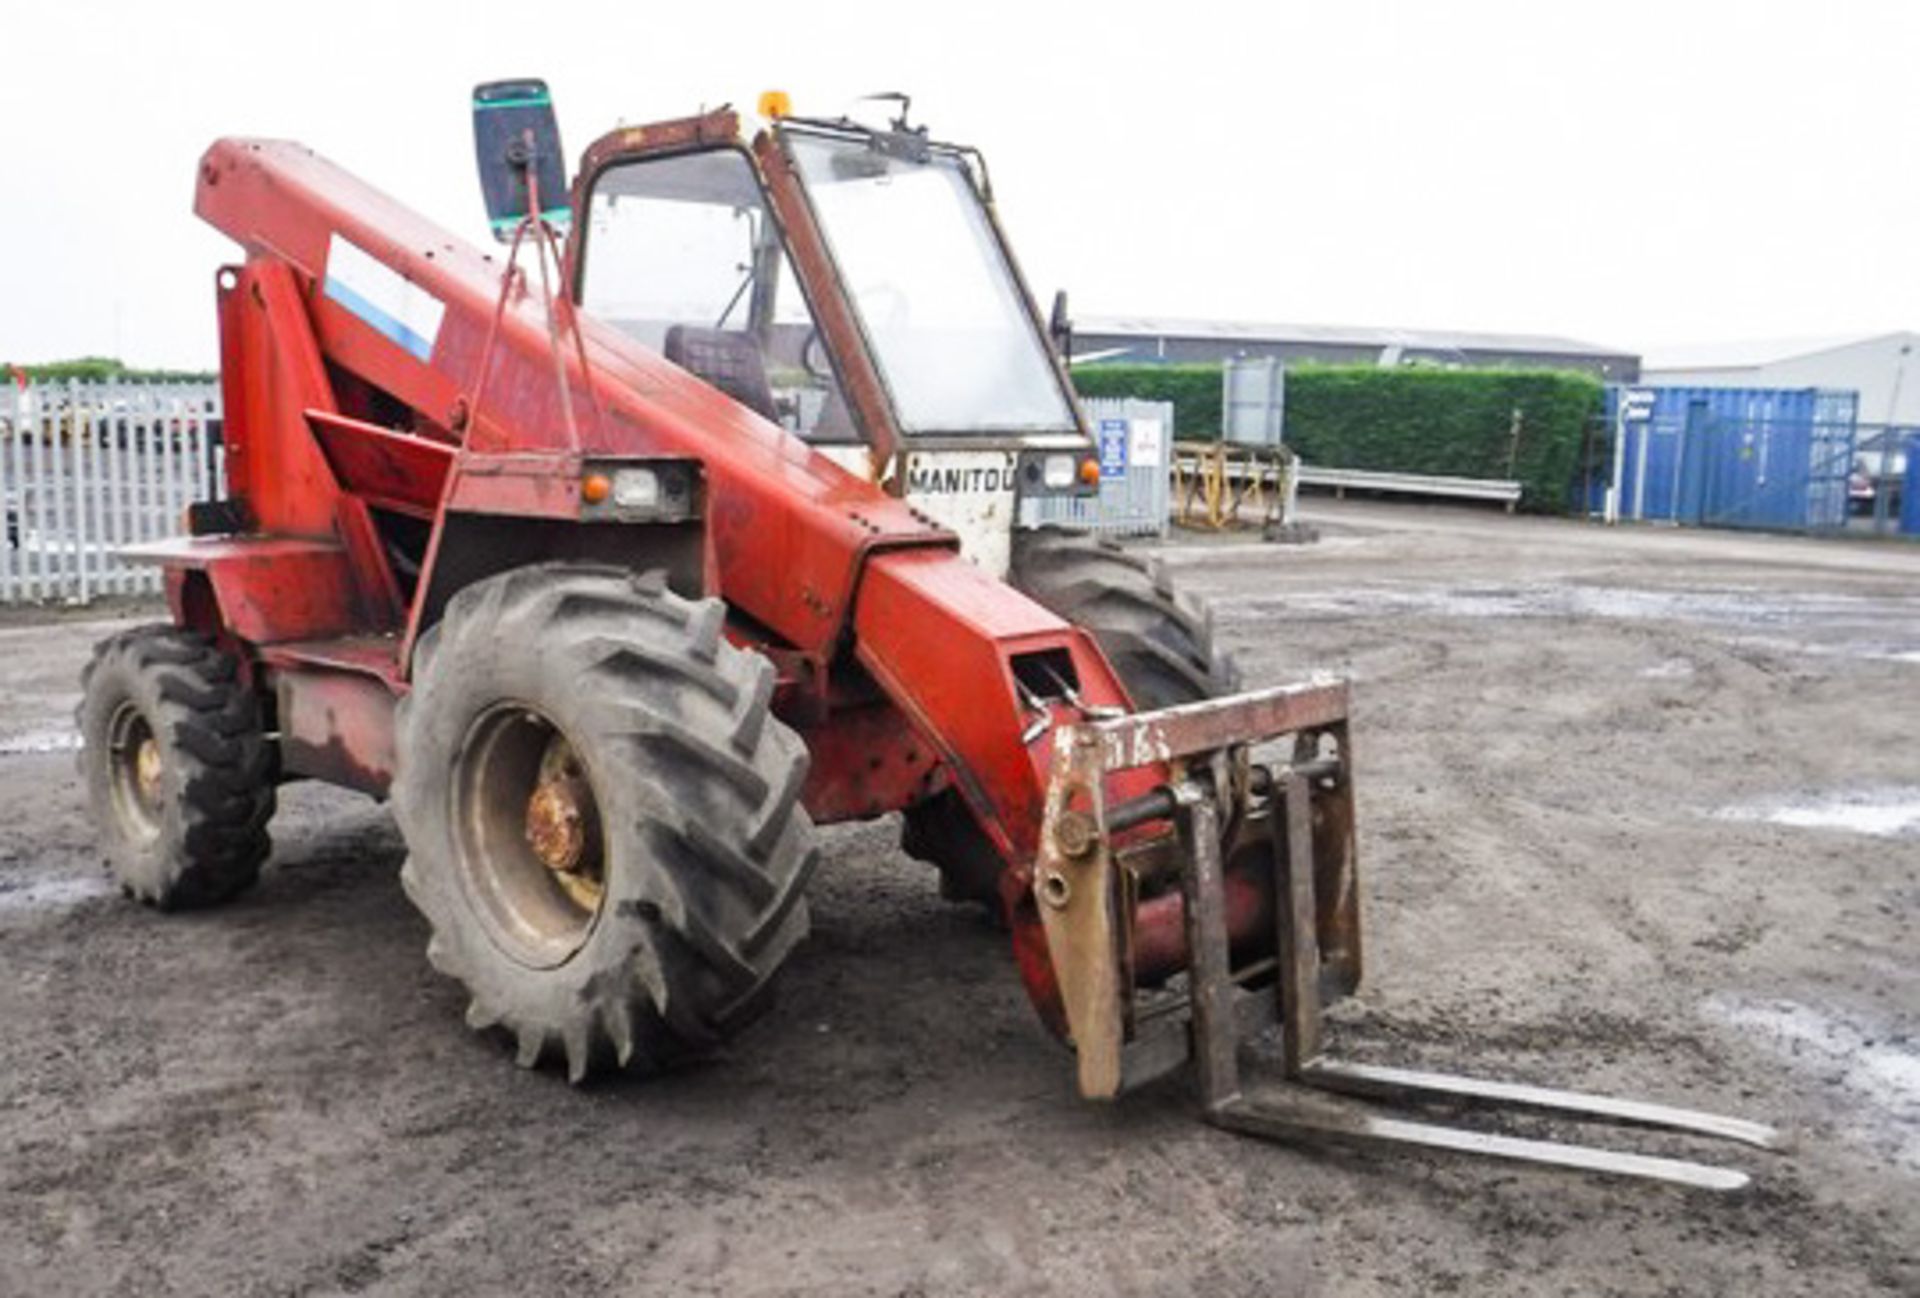 1989 MANITOU TURBO, MODEL - MT425CPT, SERIES 2, CHASSIS 185836, 5693HRS (NOT VERIFIED) ** 10% BUYERS - Image 9 of 15